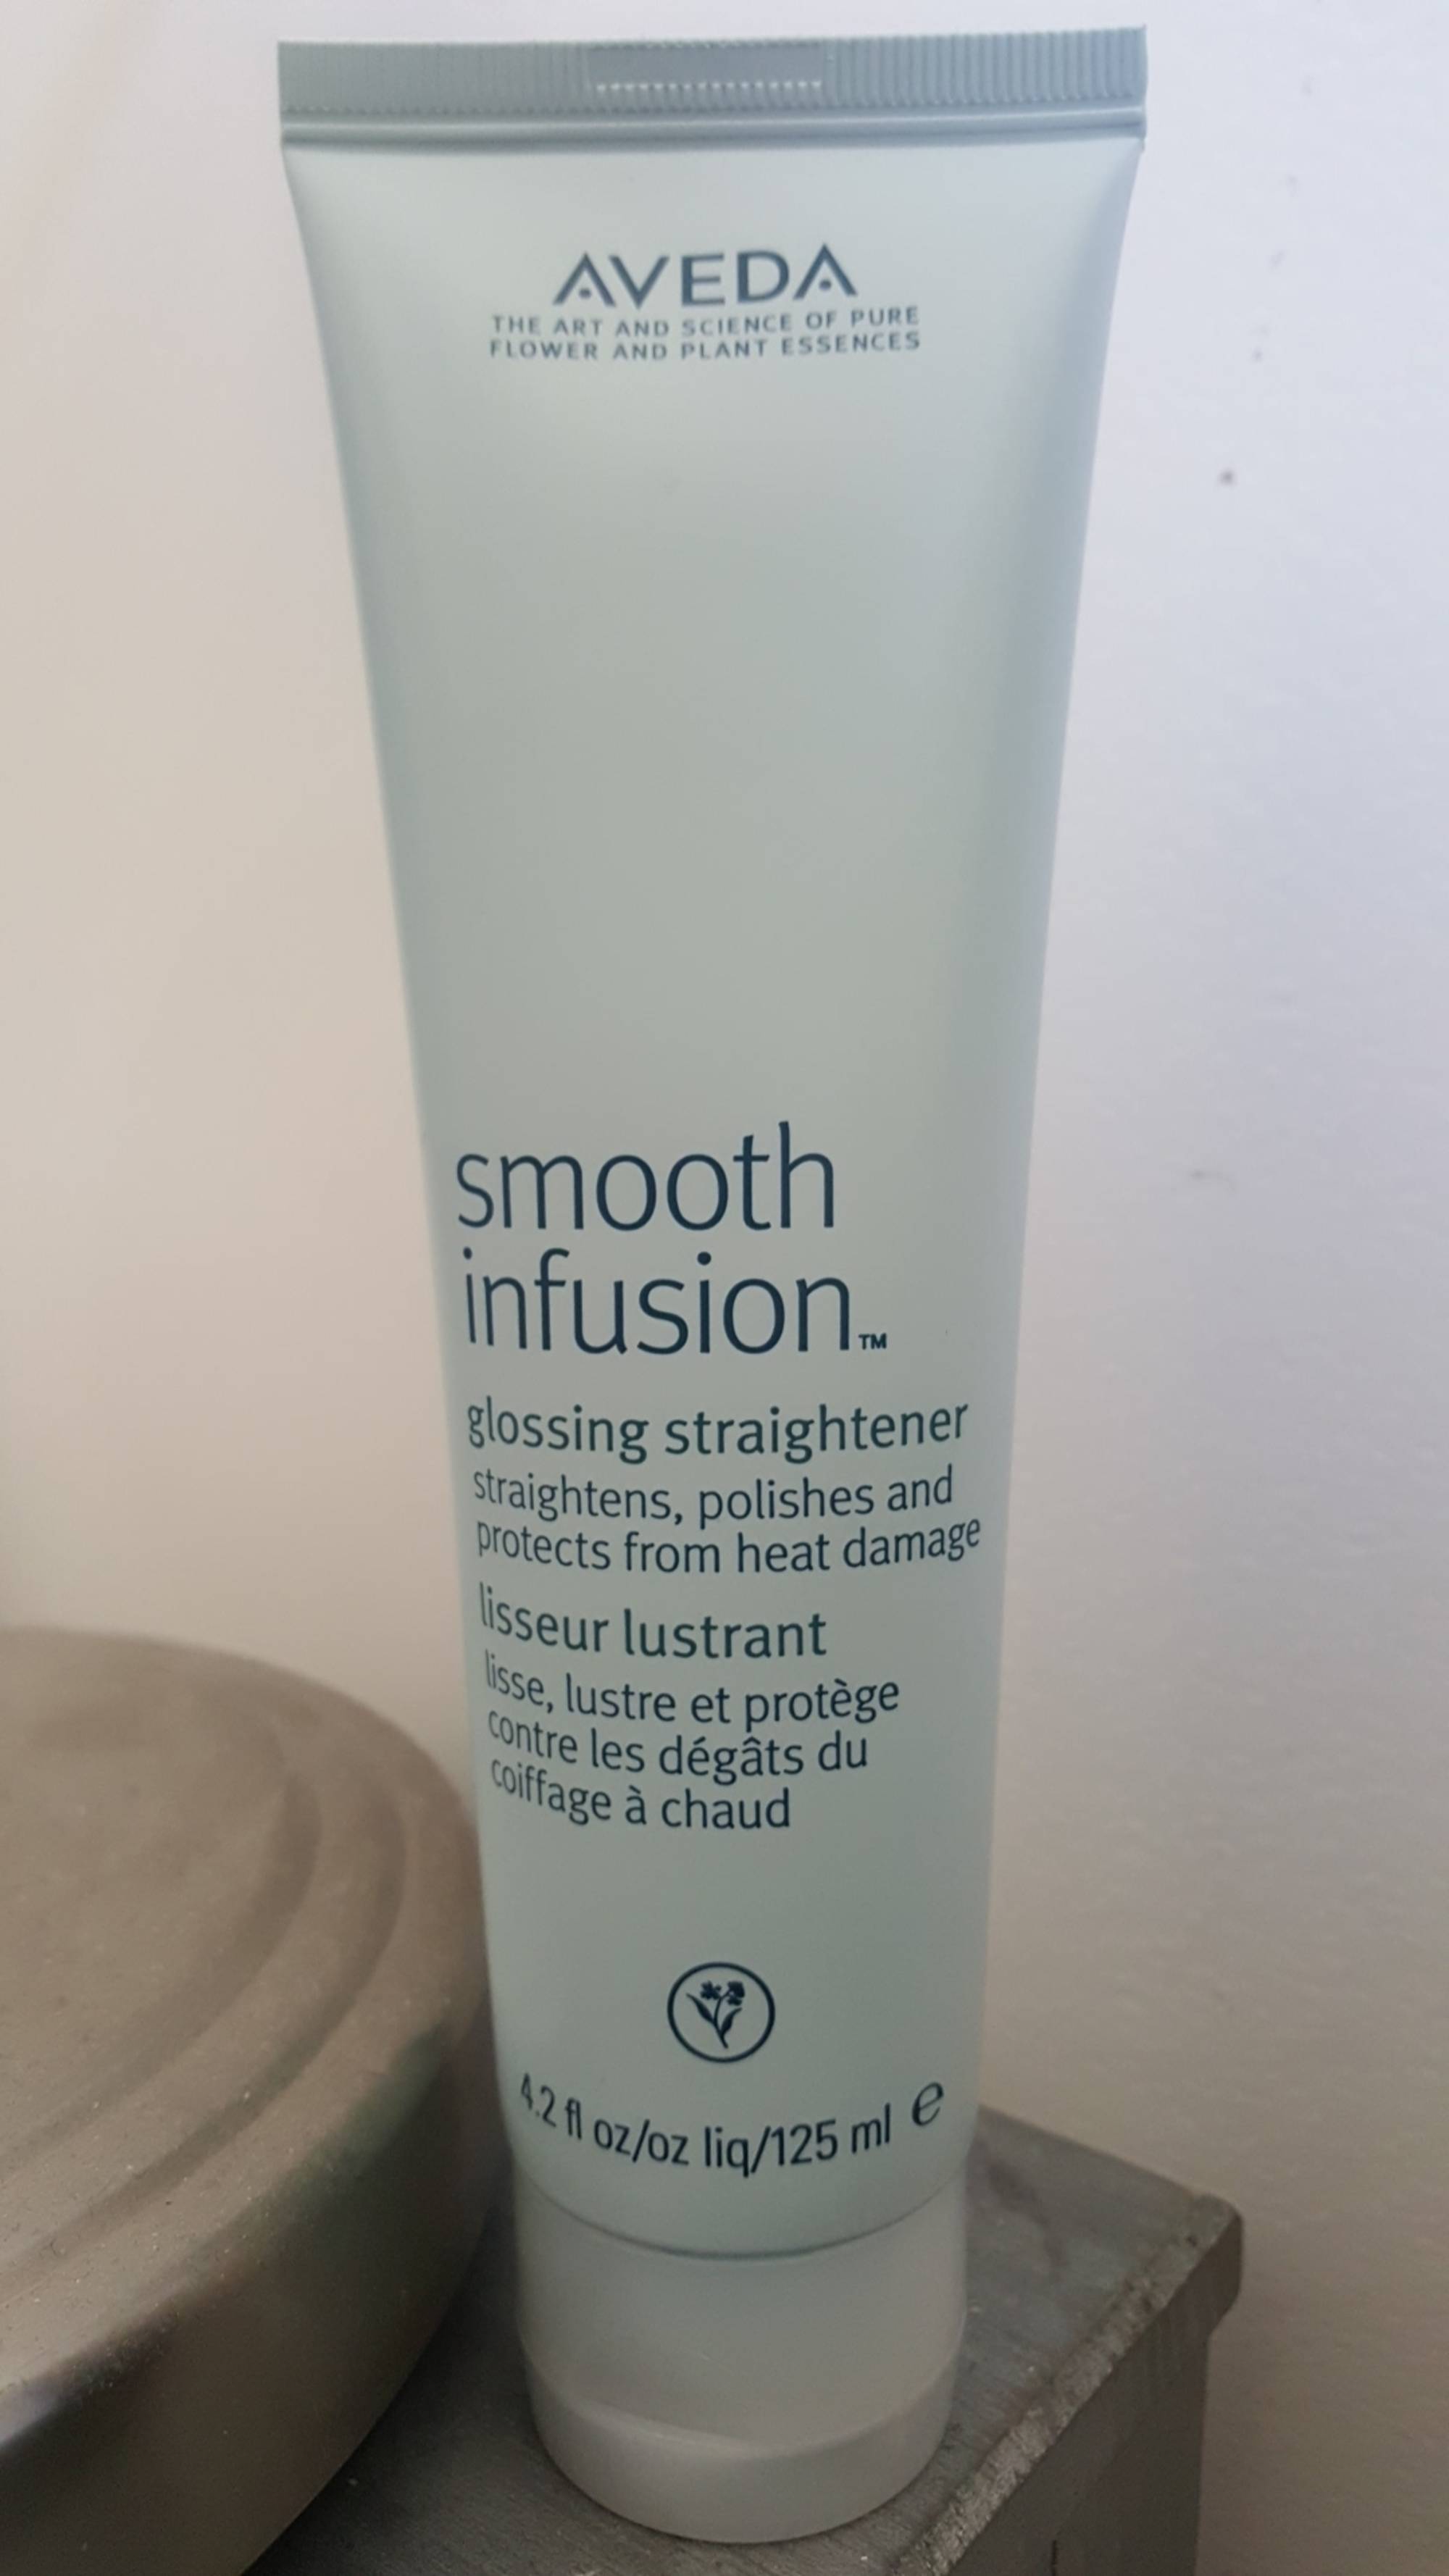 AVEDA - Smooth infusion - Lisseur lustrant